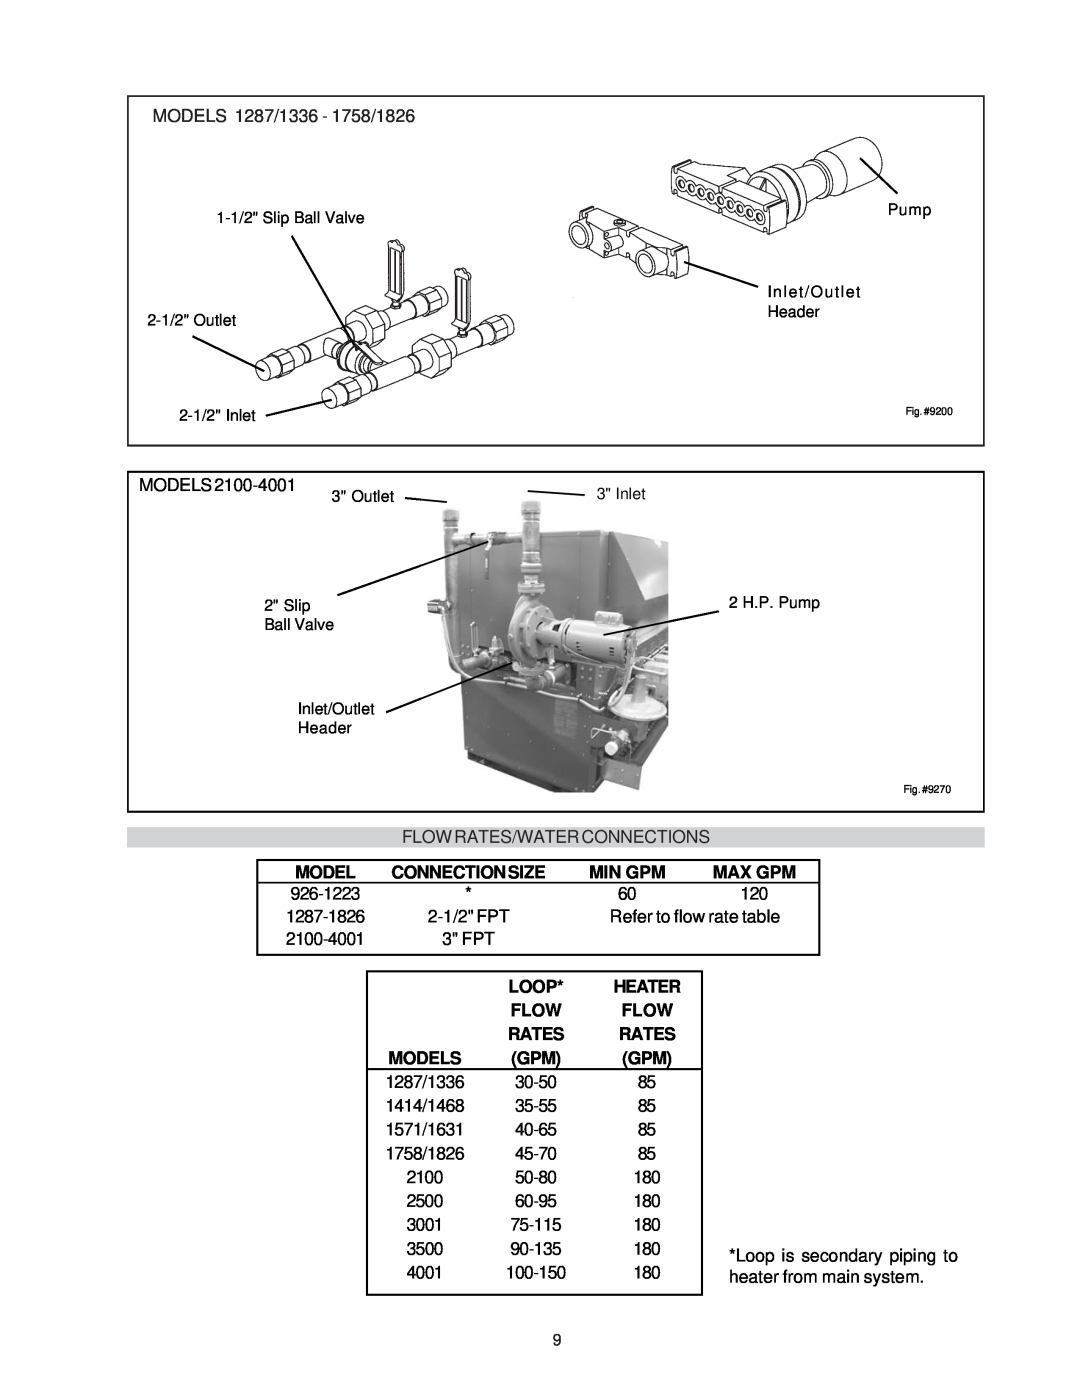 Raypak 1287-1758, 2100-4001 MODELS 1287/1336 - 1758/1826, Flow Rates/Water Connections, Model, Connectionsize, Min Gpm 